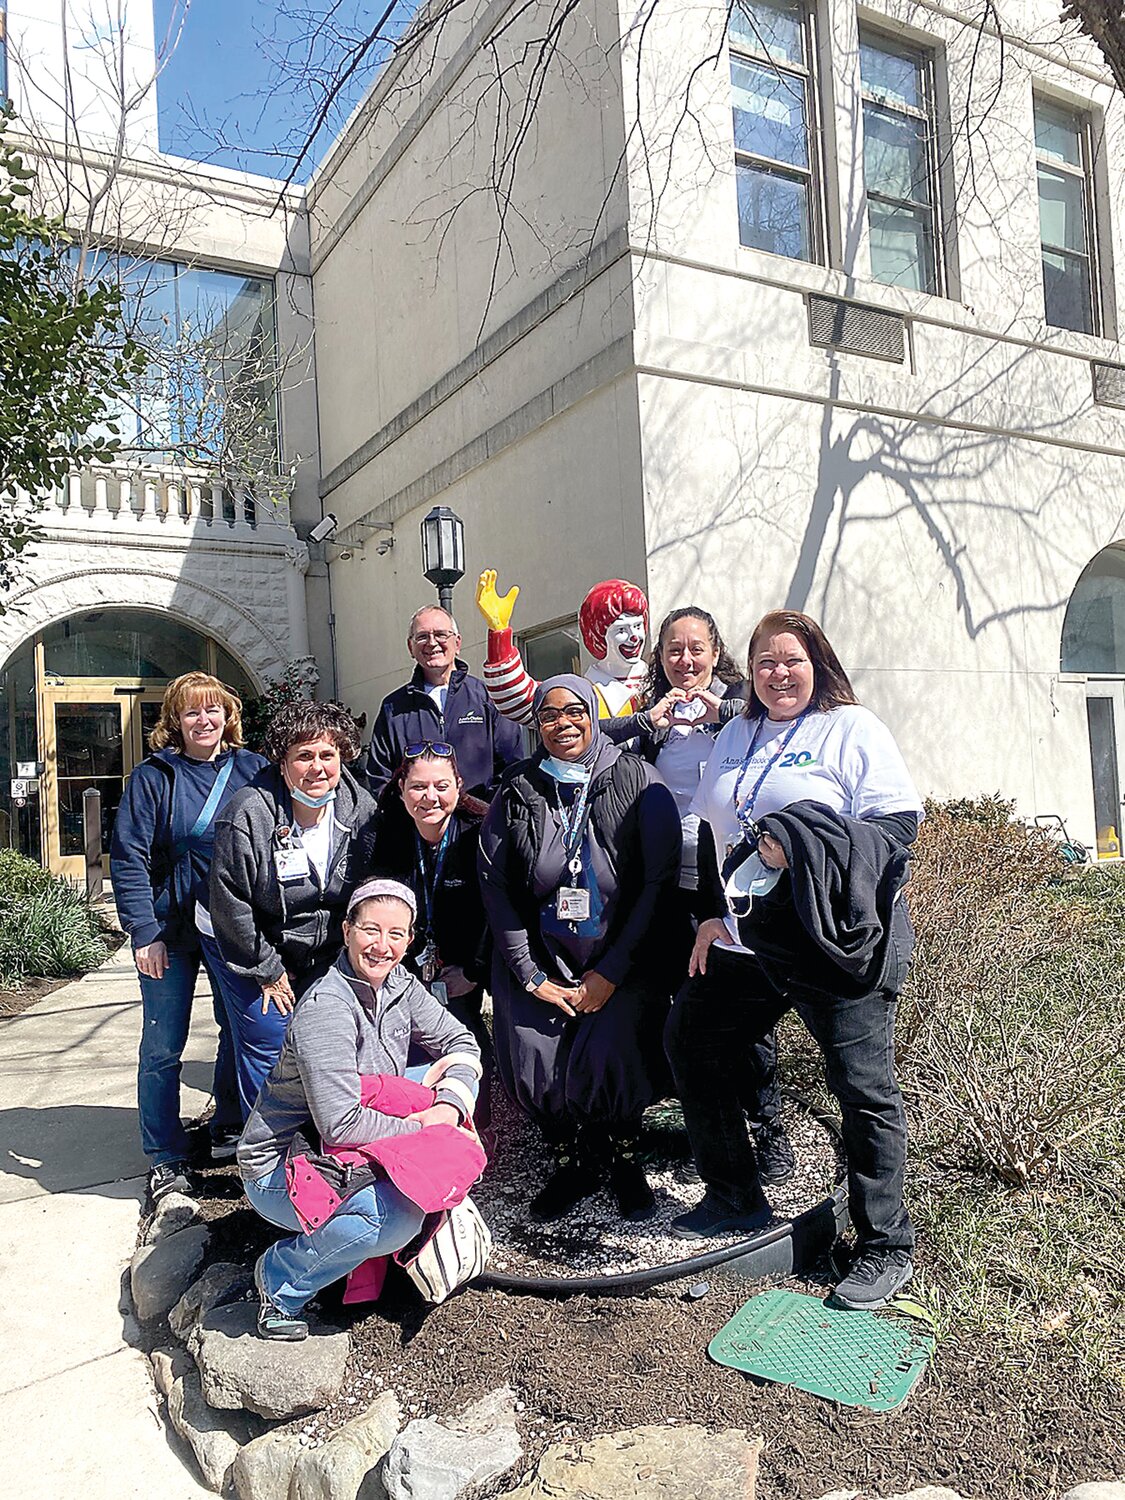 Ann’s Choice employees recently volunteered at the Children’s Hospital of Philadelphia’s Ronald McDonald House.